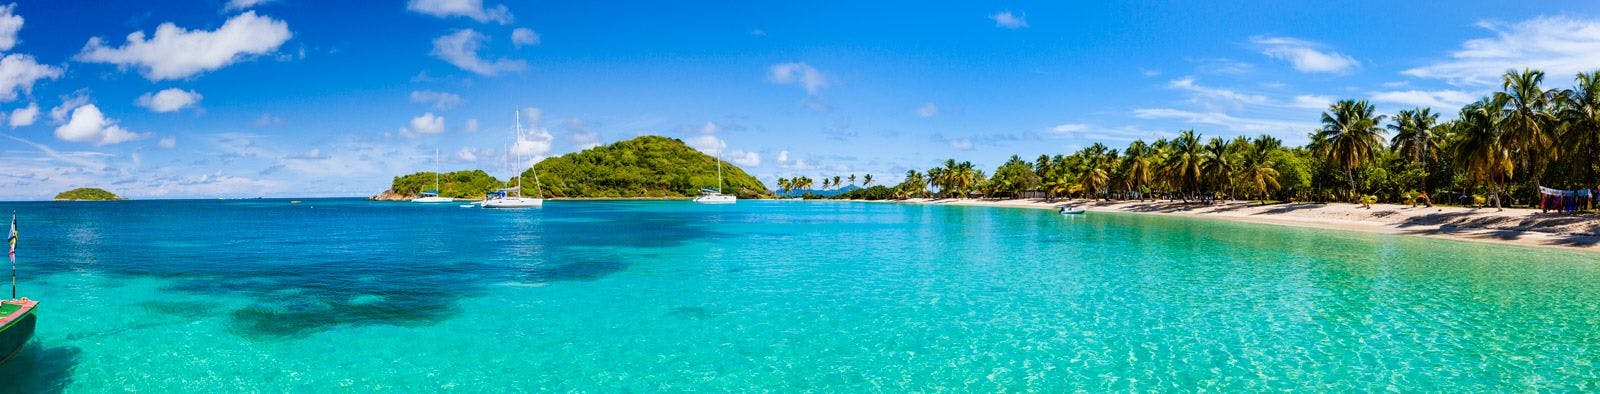 Saint Vincent and the Grenadines sheltered cove with white sand beach and reef